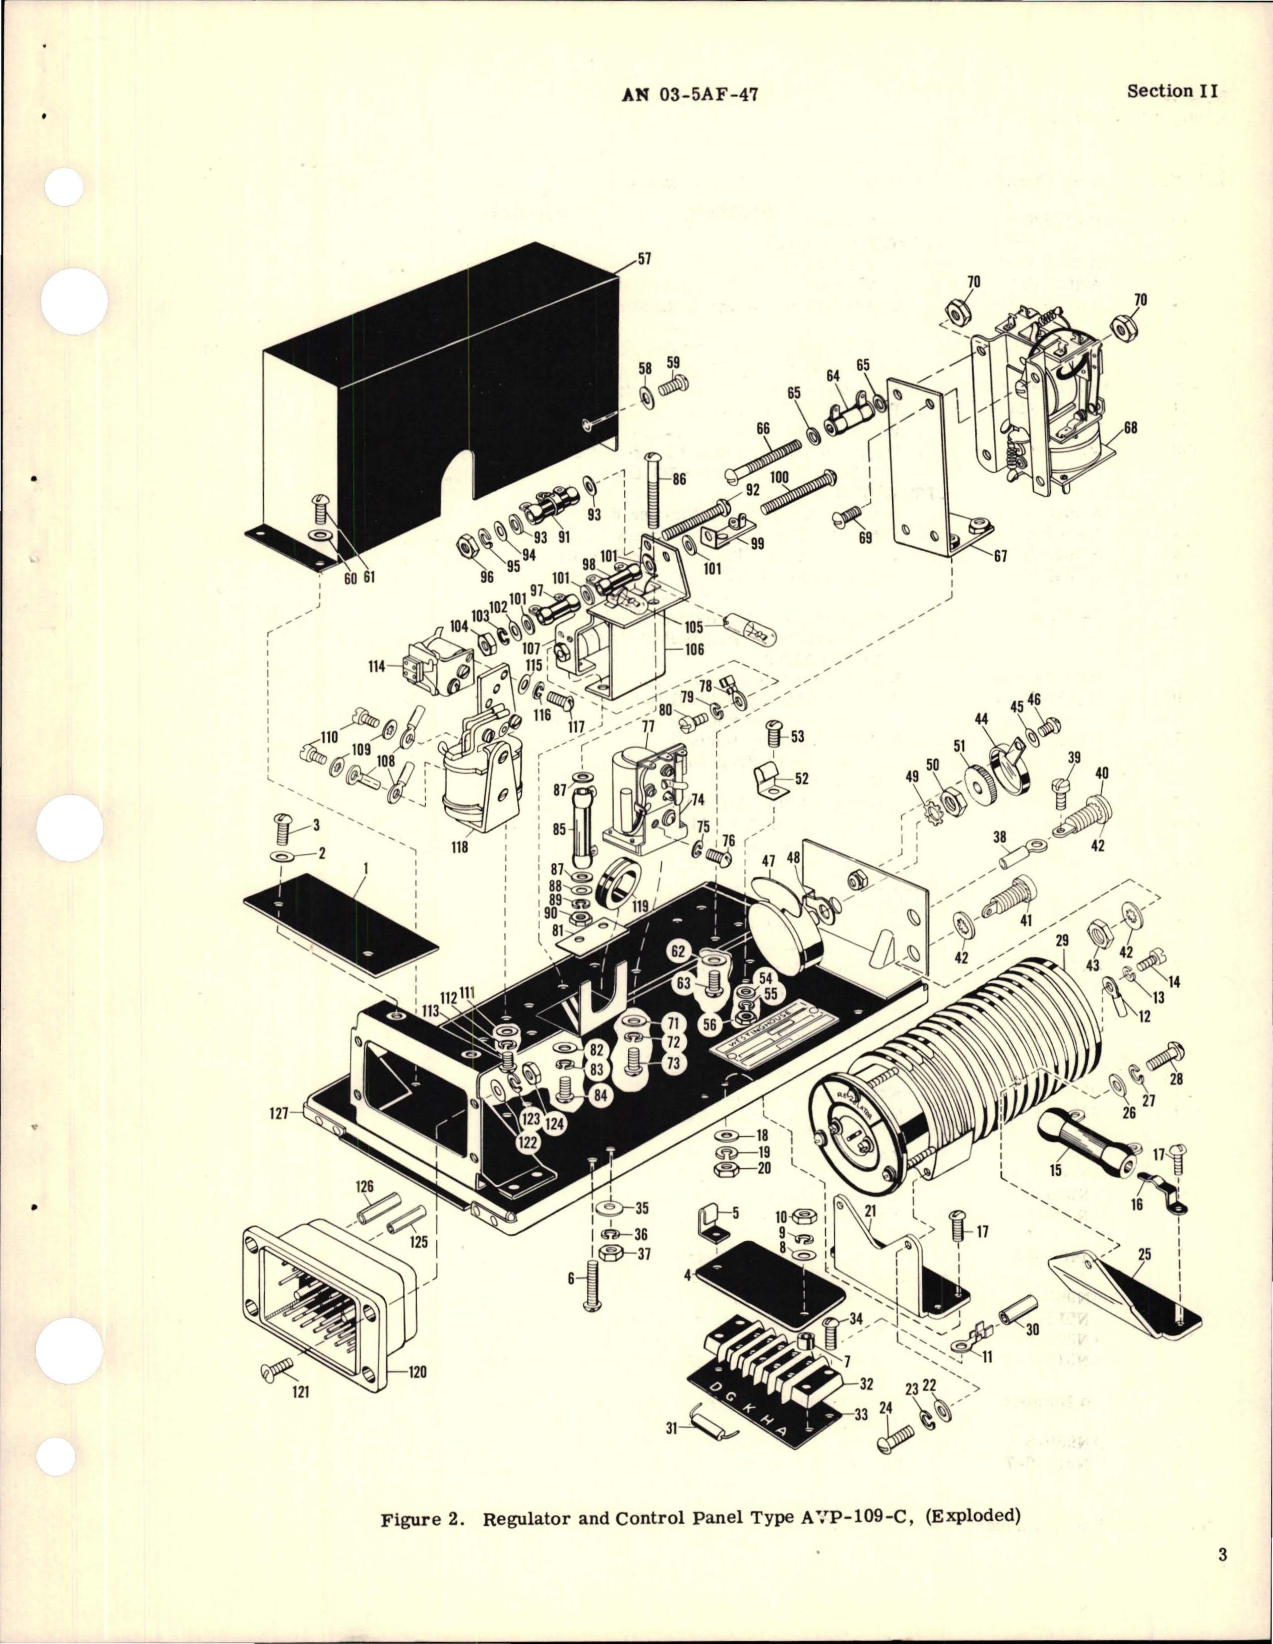 Sample page 5 from AirCorps Library document: Parts Catalog for Regulator and Control Panel - Part A24A9178-3 - Type AVP-109-C